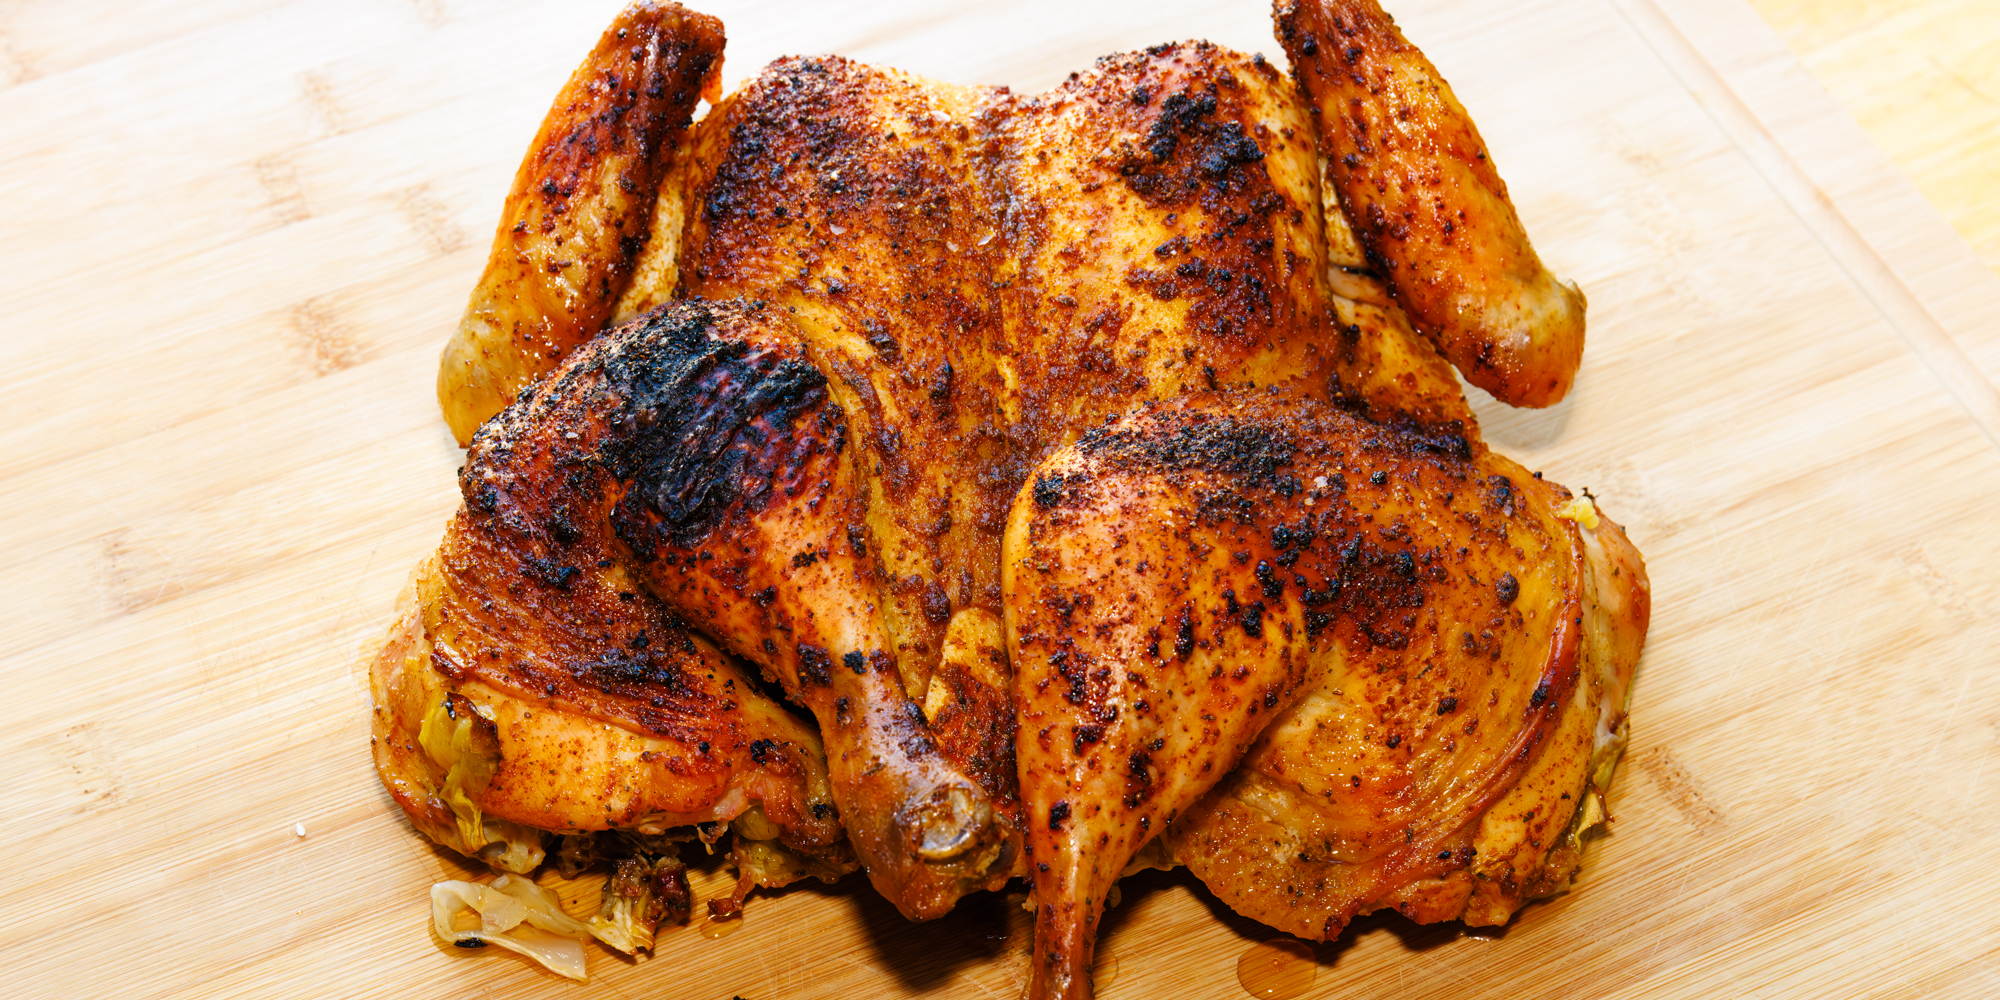 A roasted spatchcocked chicken